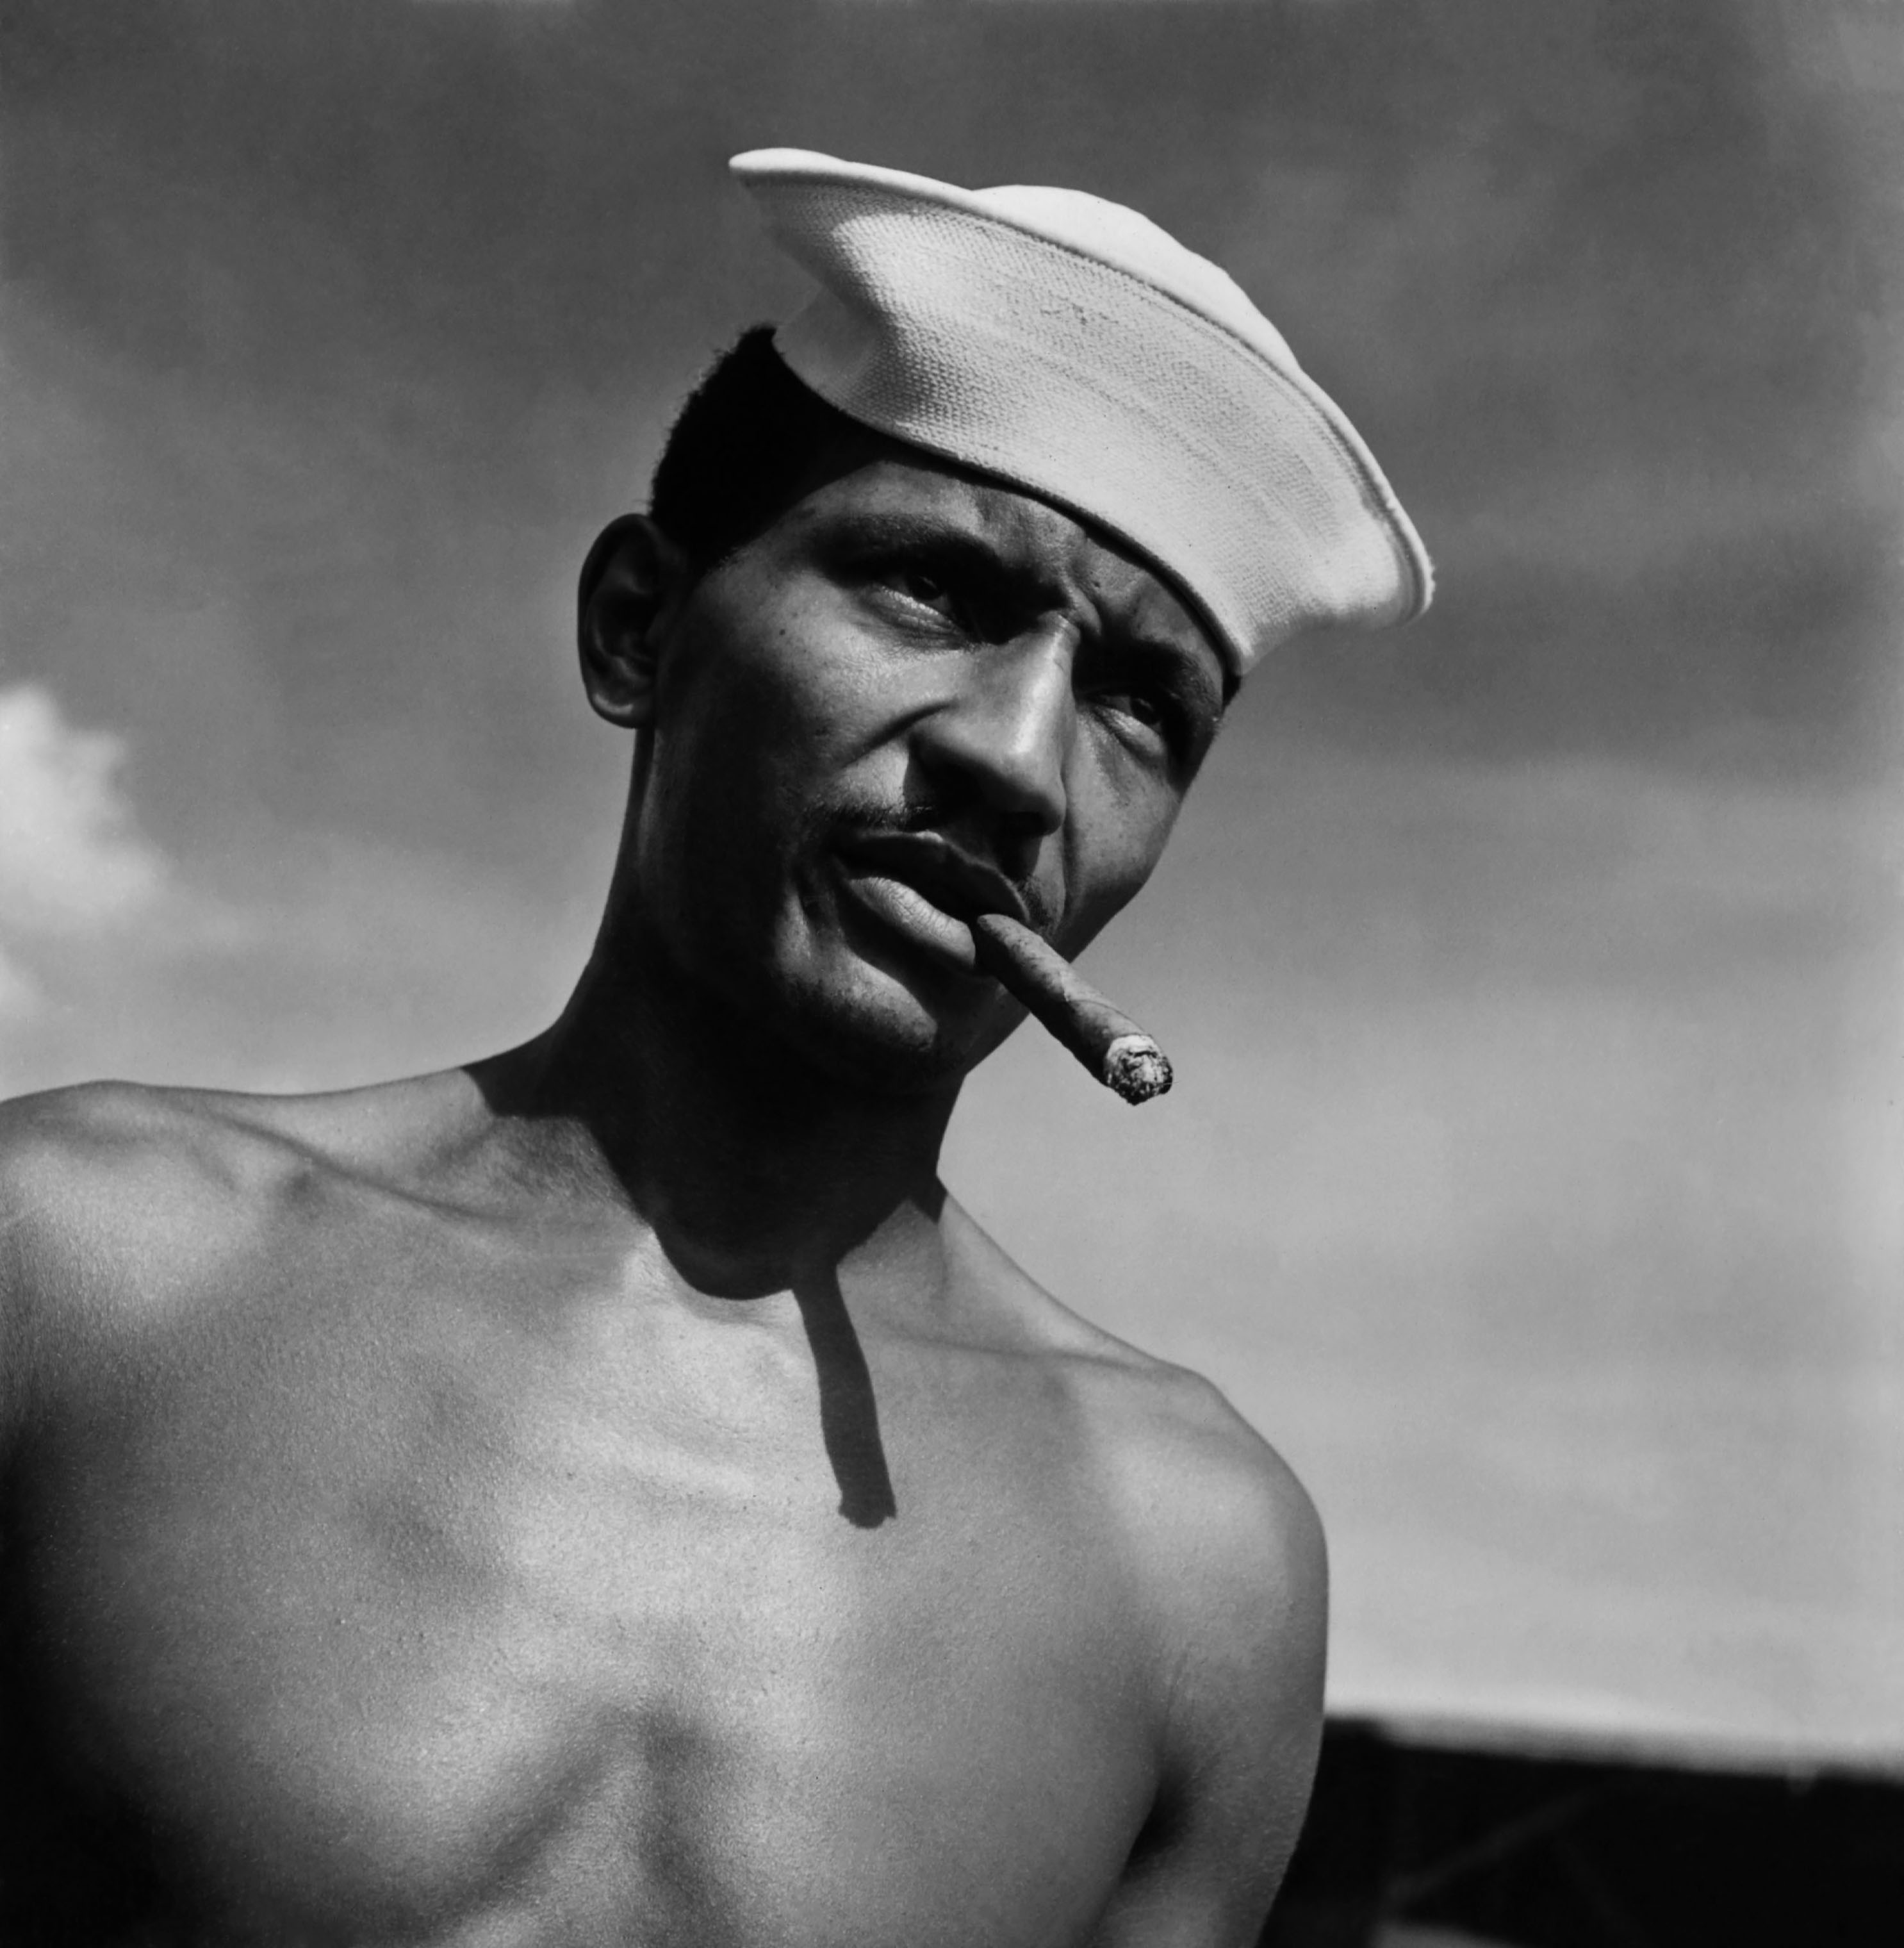 A soldier assigned to work as a laborer at the U.S. Naval Supply Depot on Guam, in 1945. (Wayne Miller—Magnum Photos)